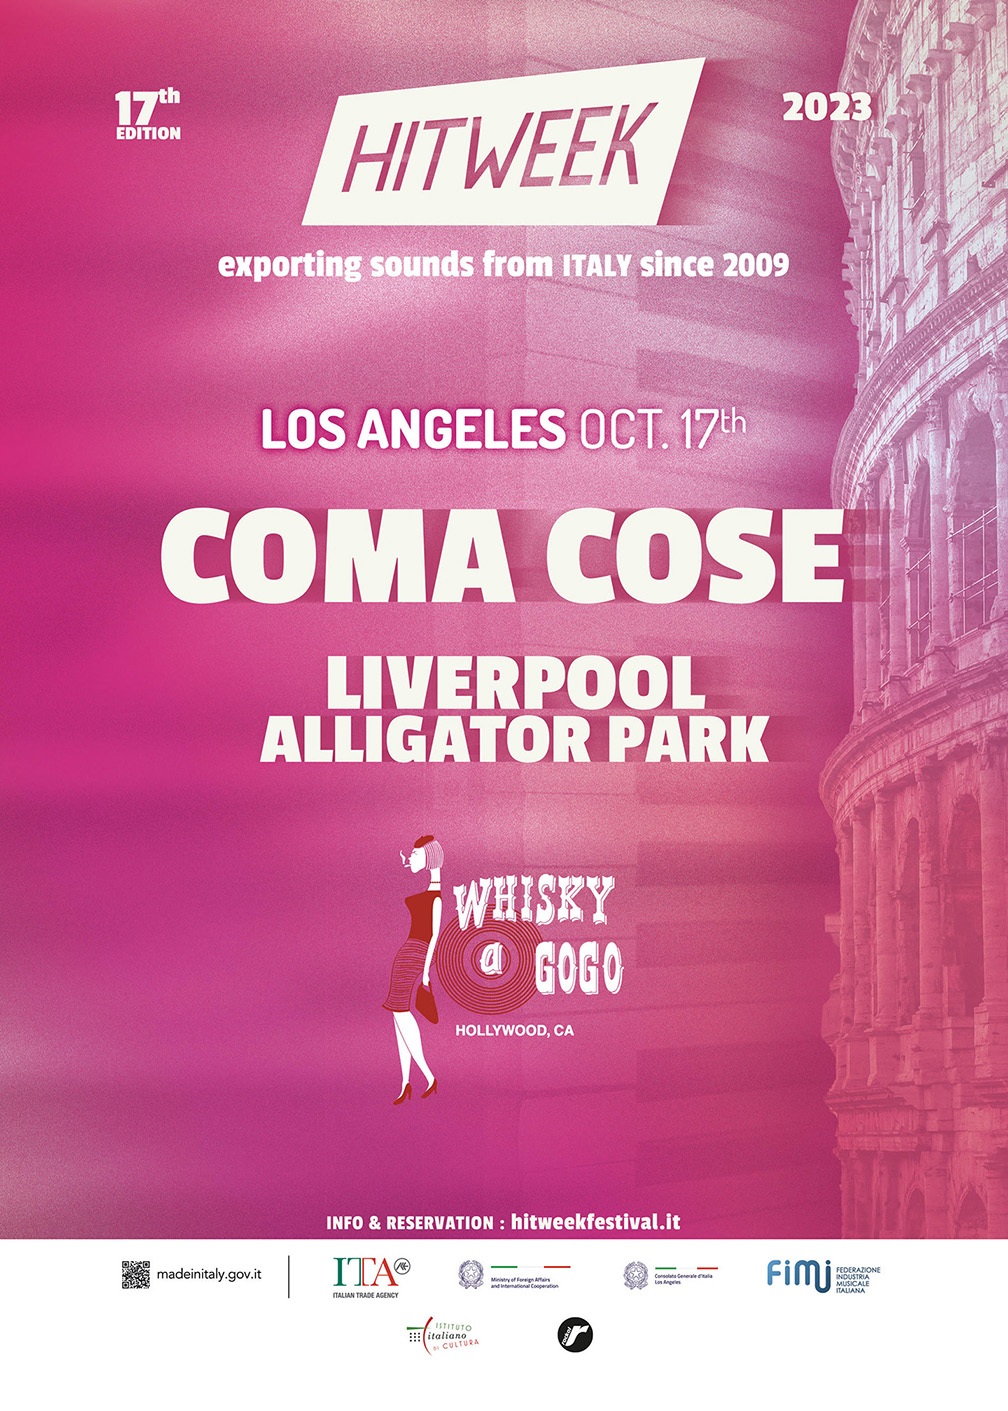 Hit Week Festival with Coma Cose